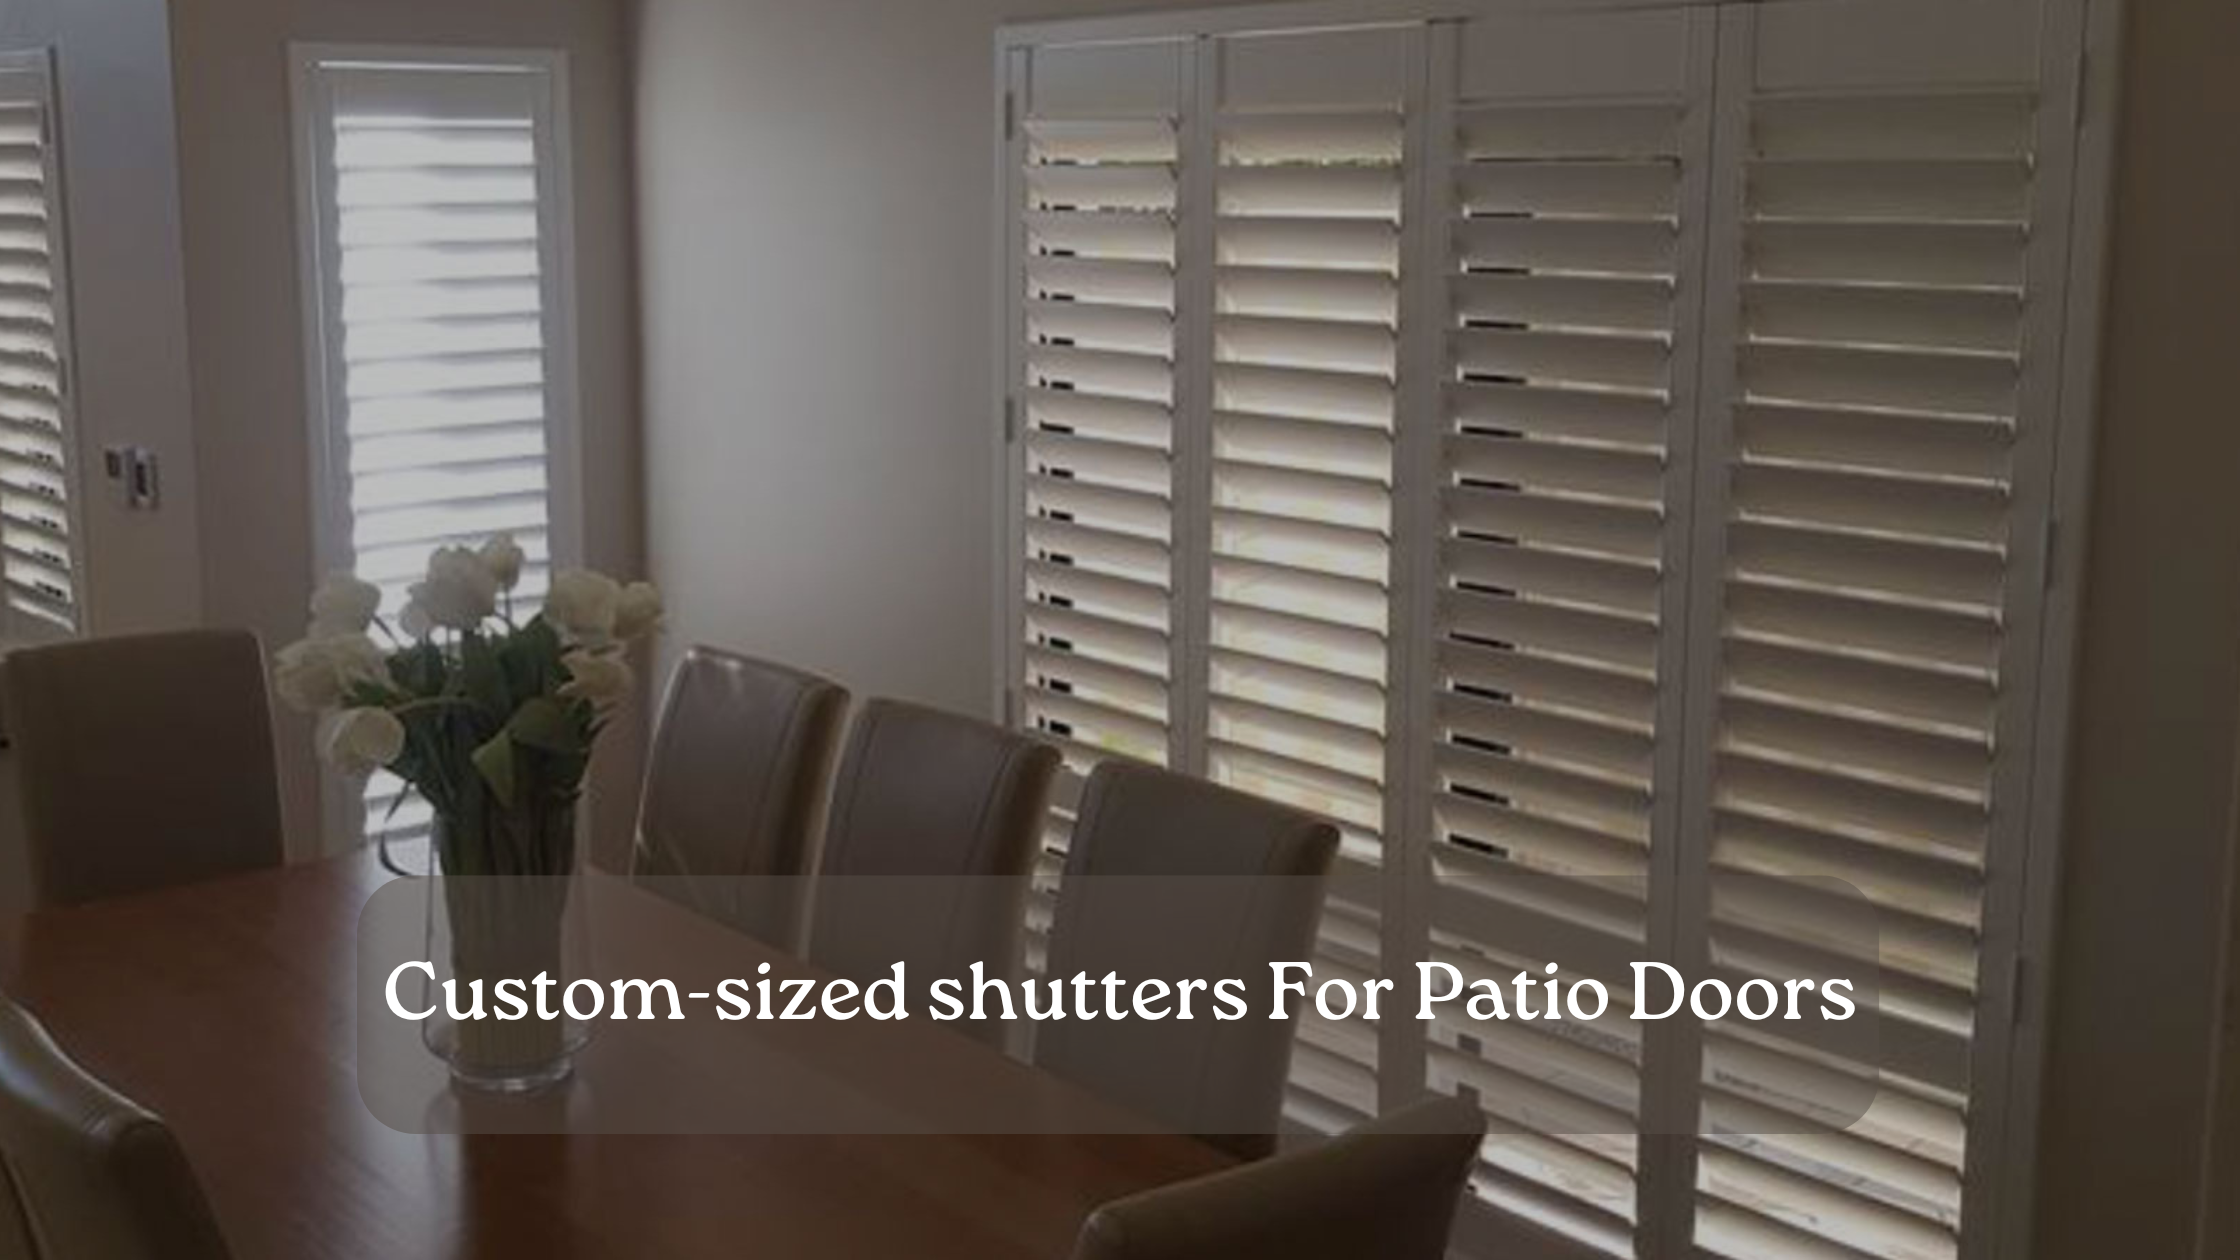 Can You Use Shutters For Patio Doors?